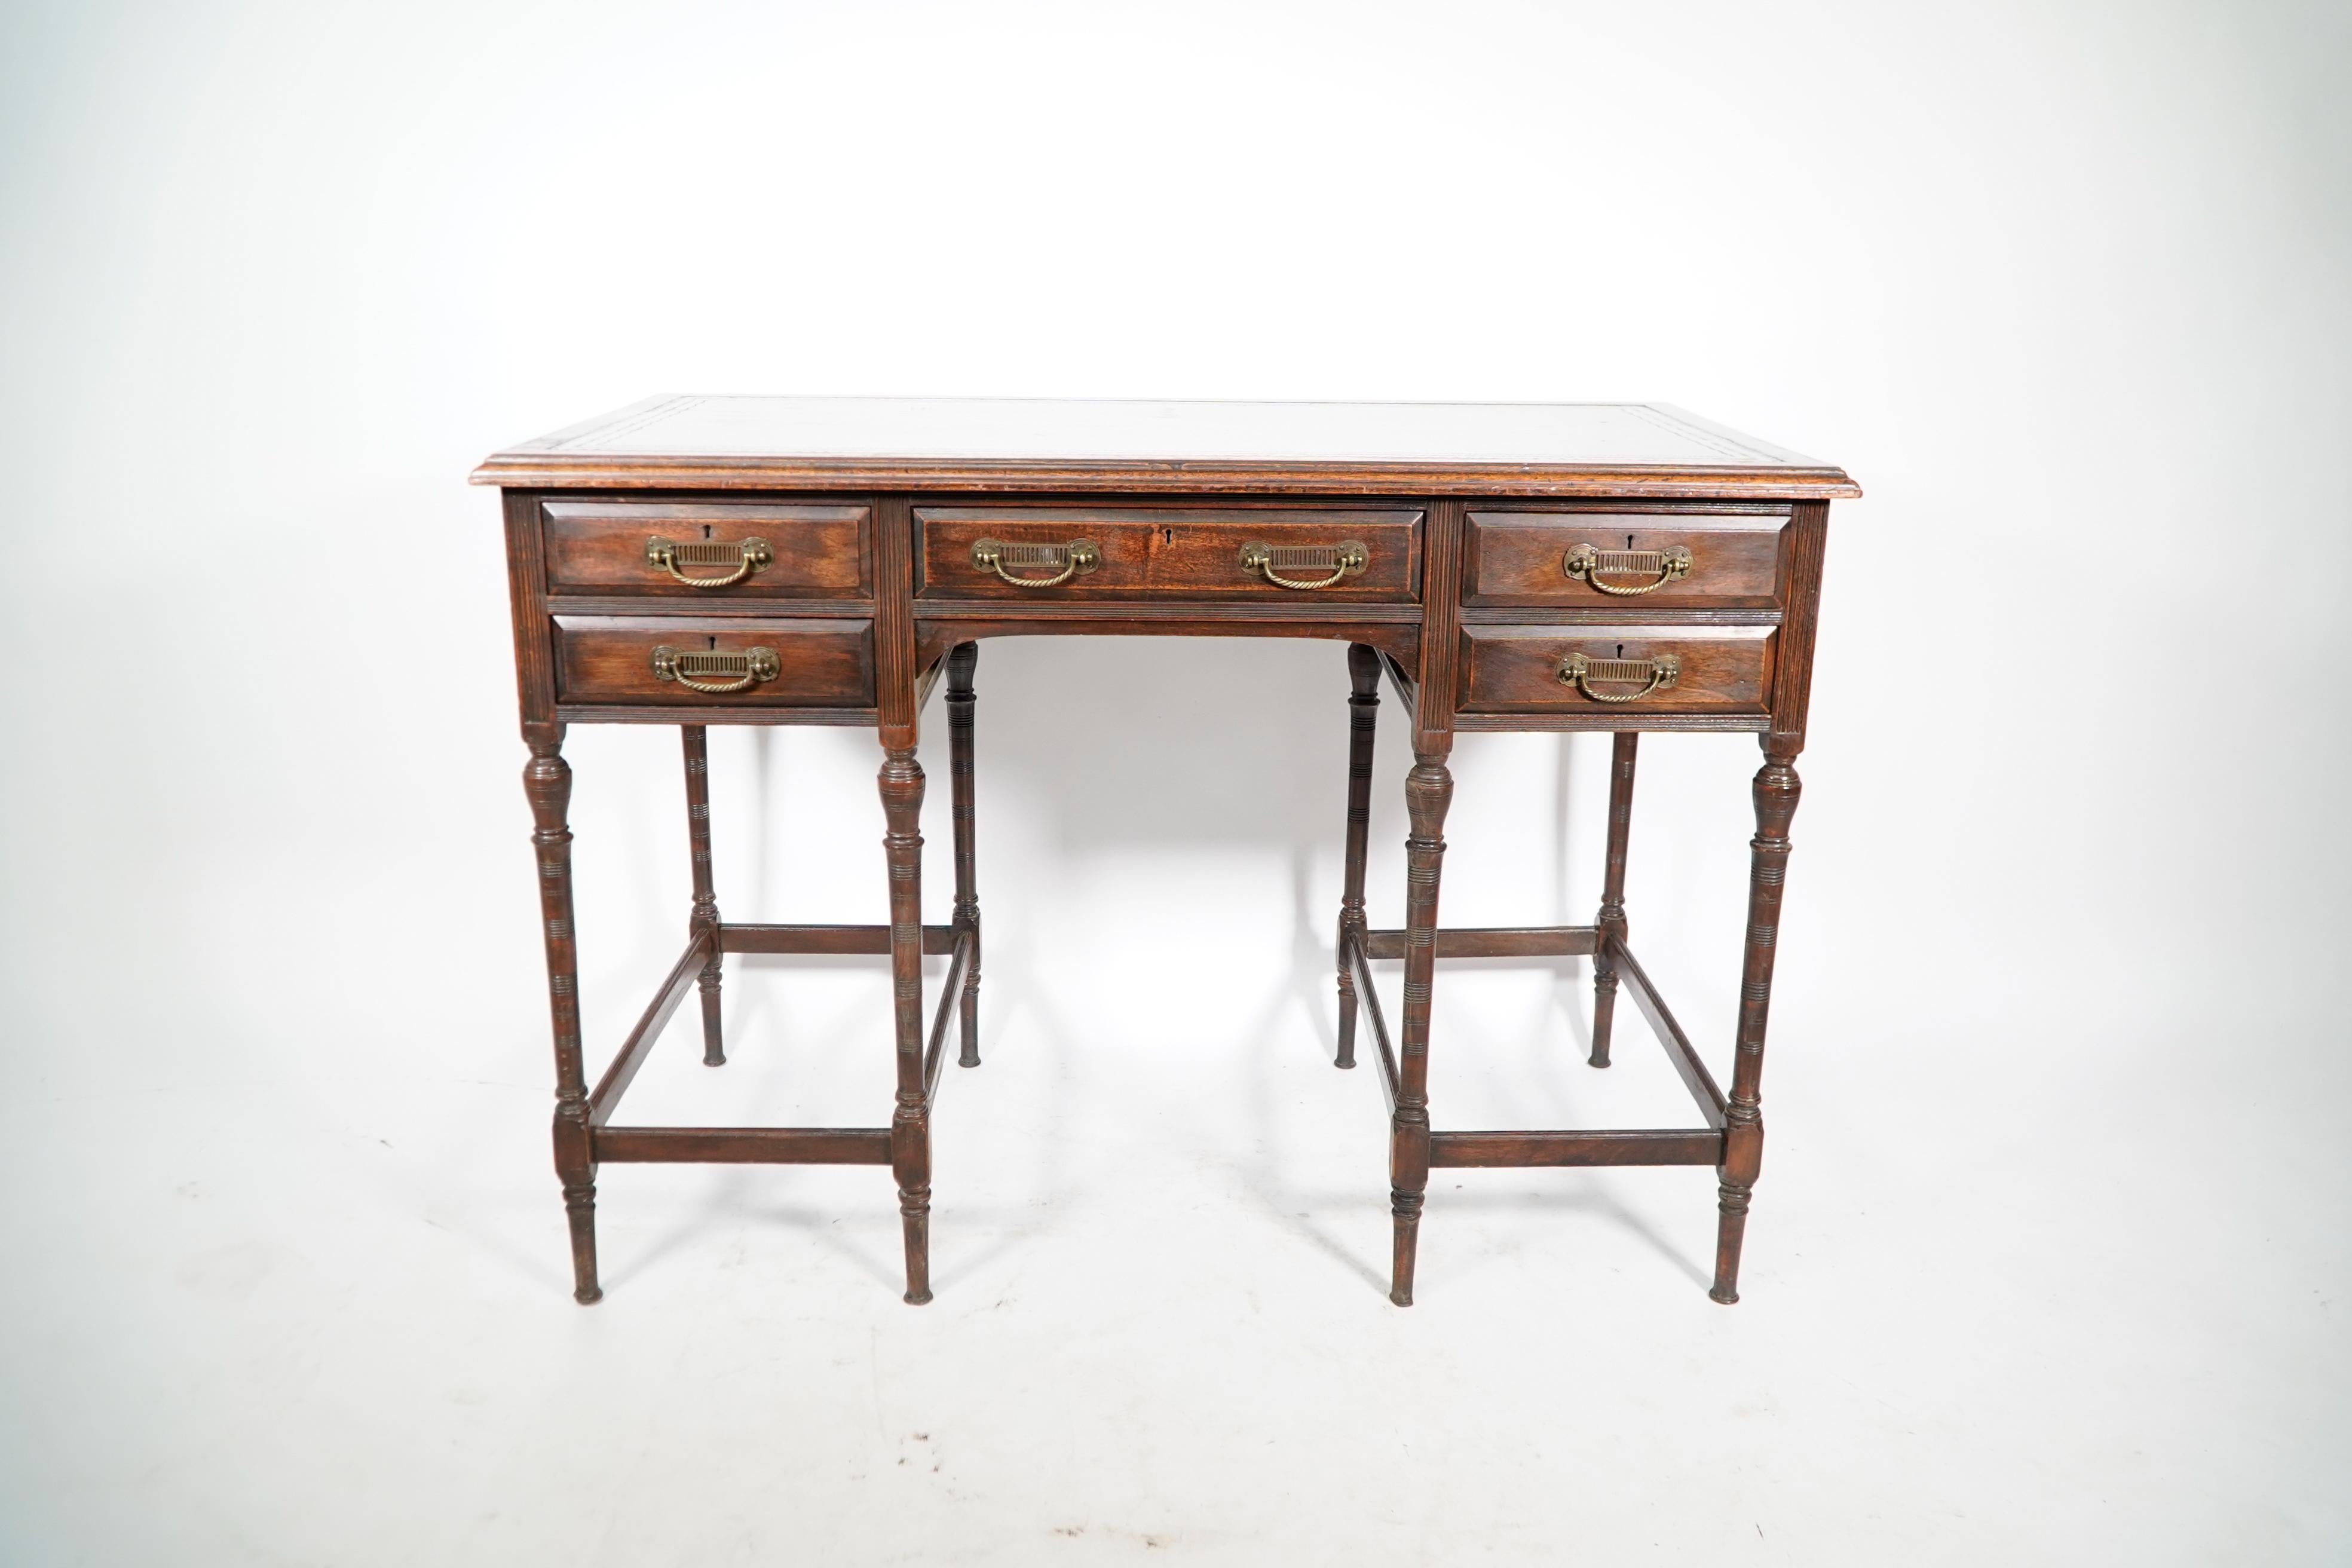 Collinson and Lock. Attributed to E W Godwin. An exceptional quality walnut writing table with five upper drawers each with swan neck handles standing on eight finely turned legs, each side united by circular pierced details.
Renewed period style